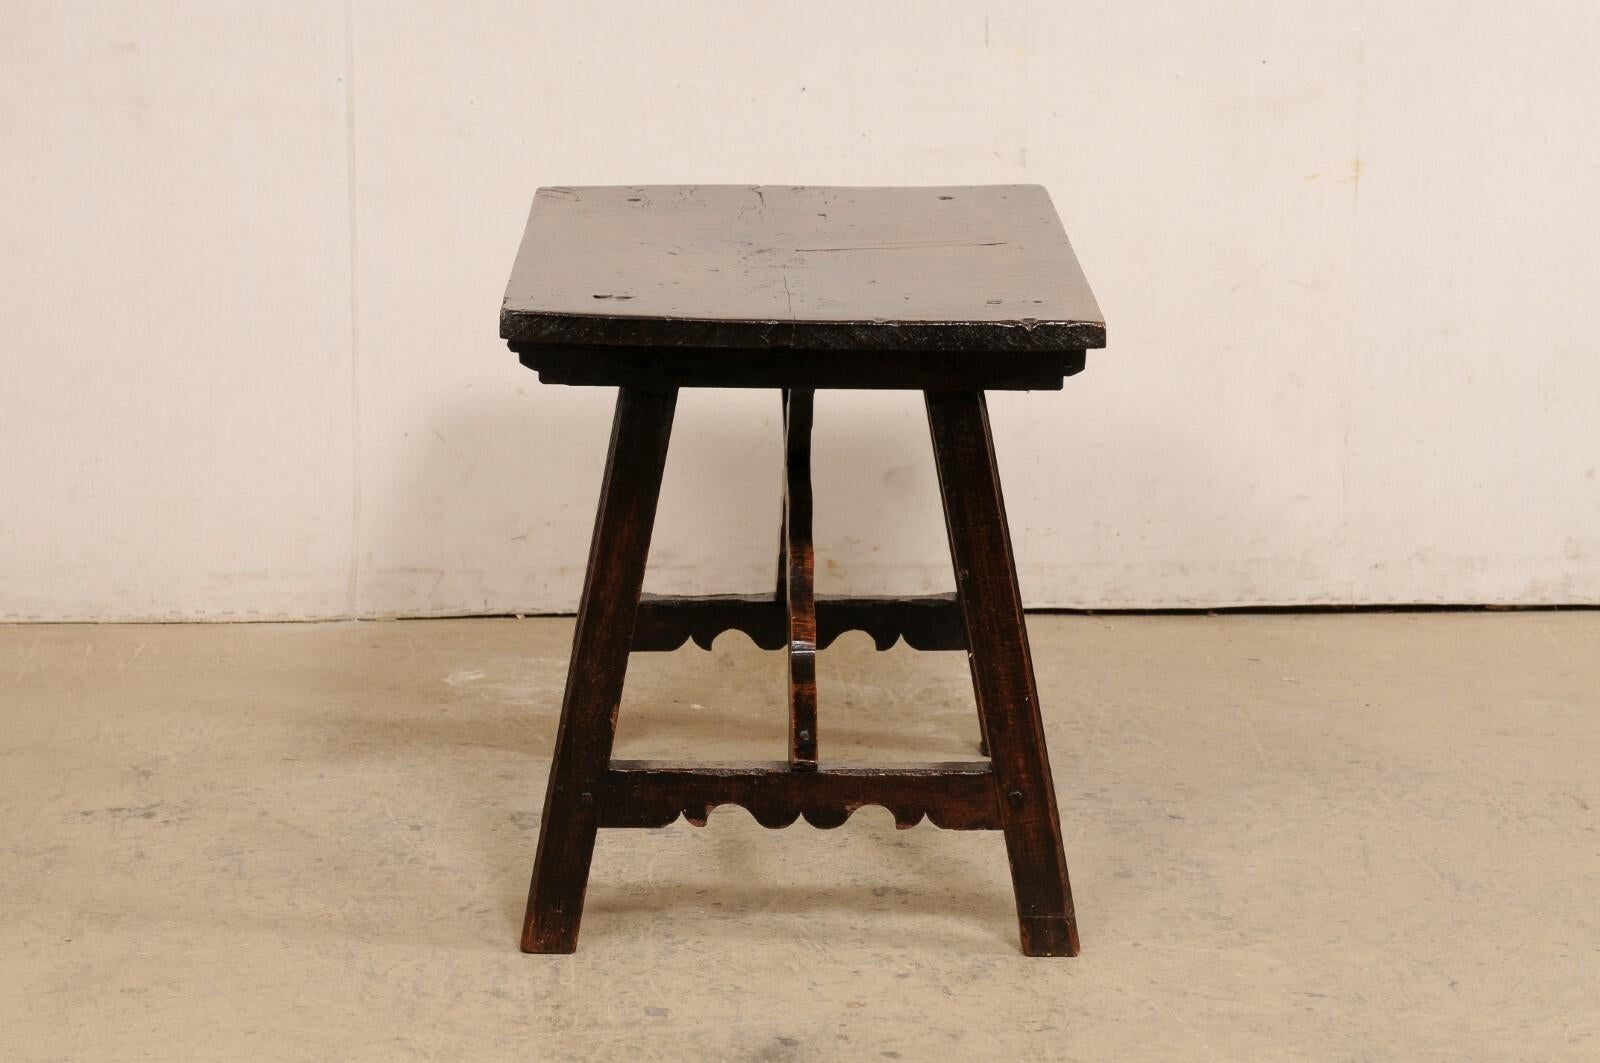 18th C. Spanish Table with a Wavy X-Stretcher at Underside For Sale 3